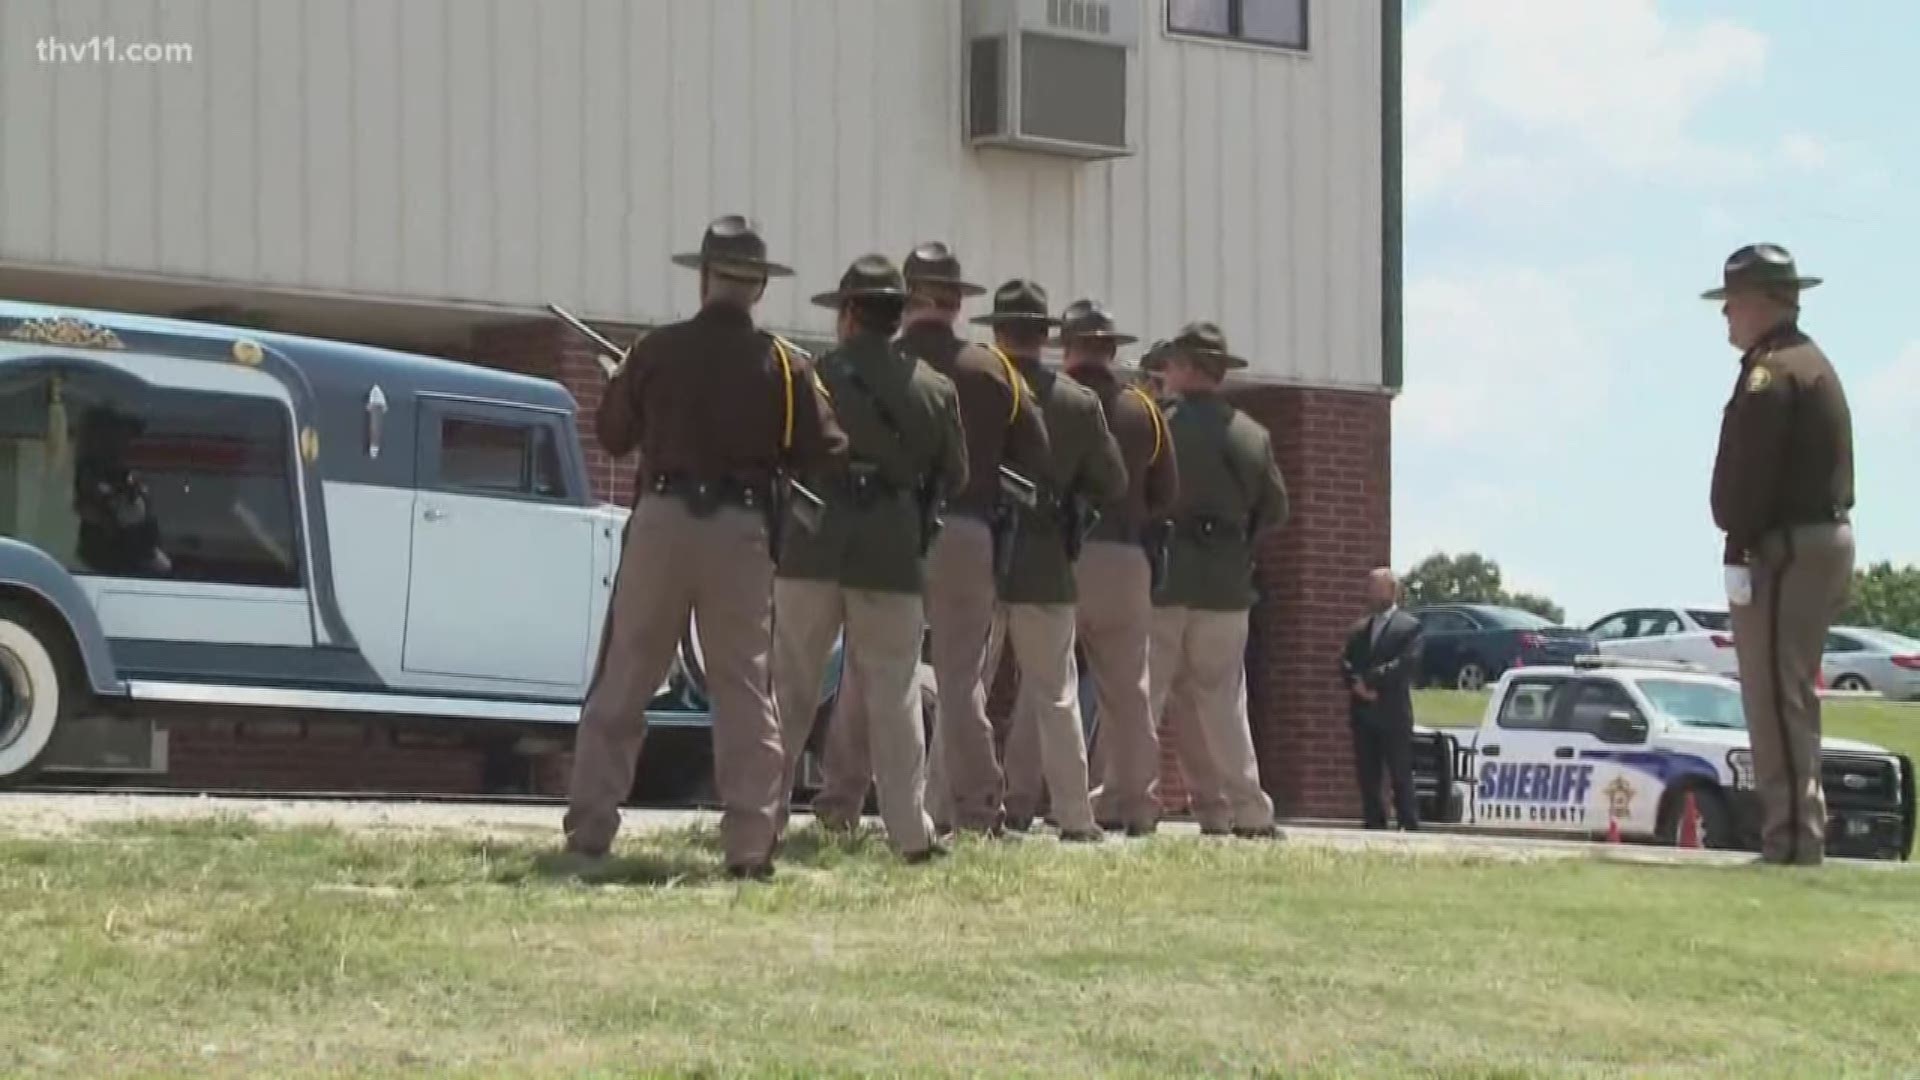 A community gathered to lay fallen Stone County deputy Mike Stephen to rest today.